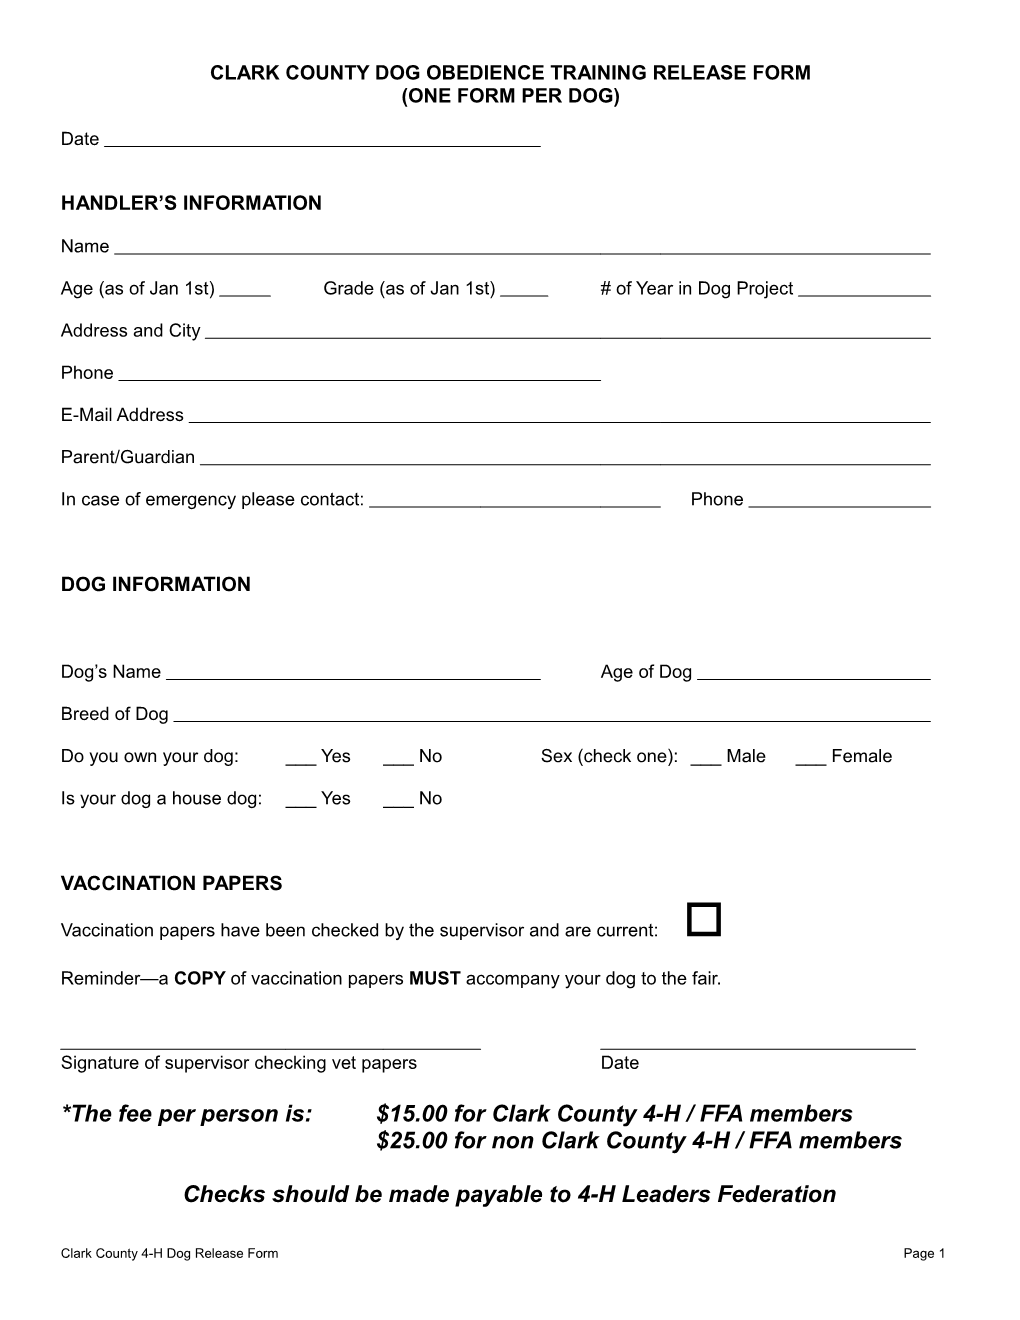 Clark County Dog Obedience Training Release Form